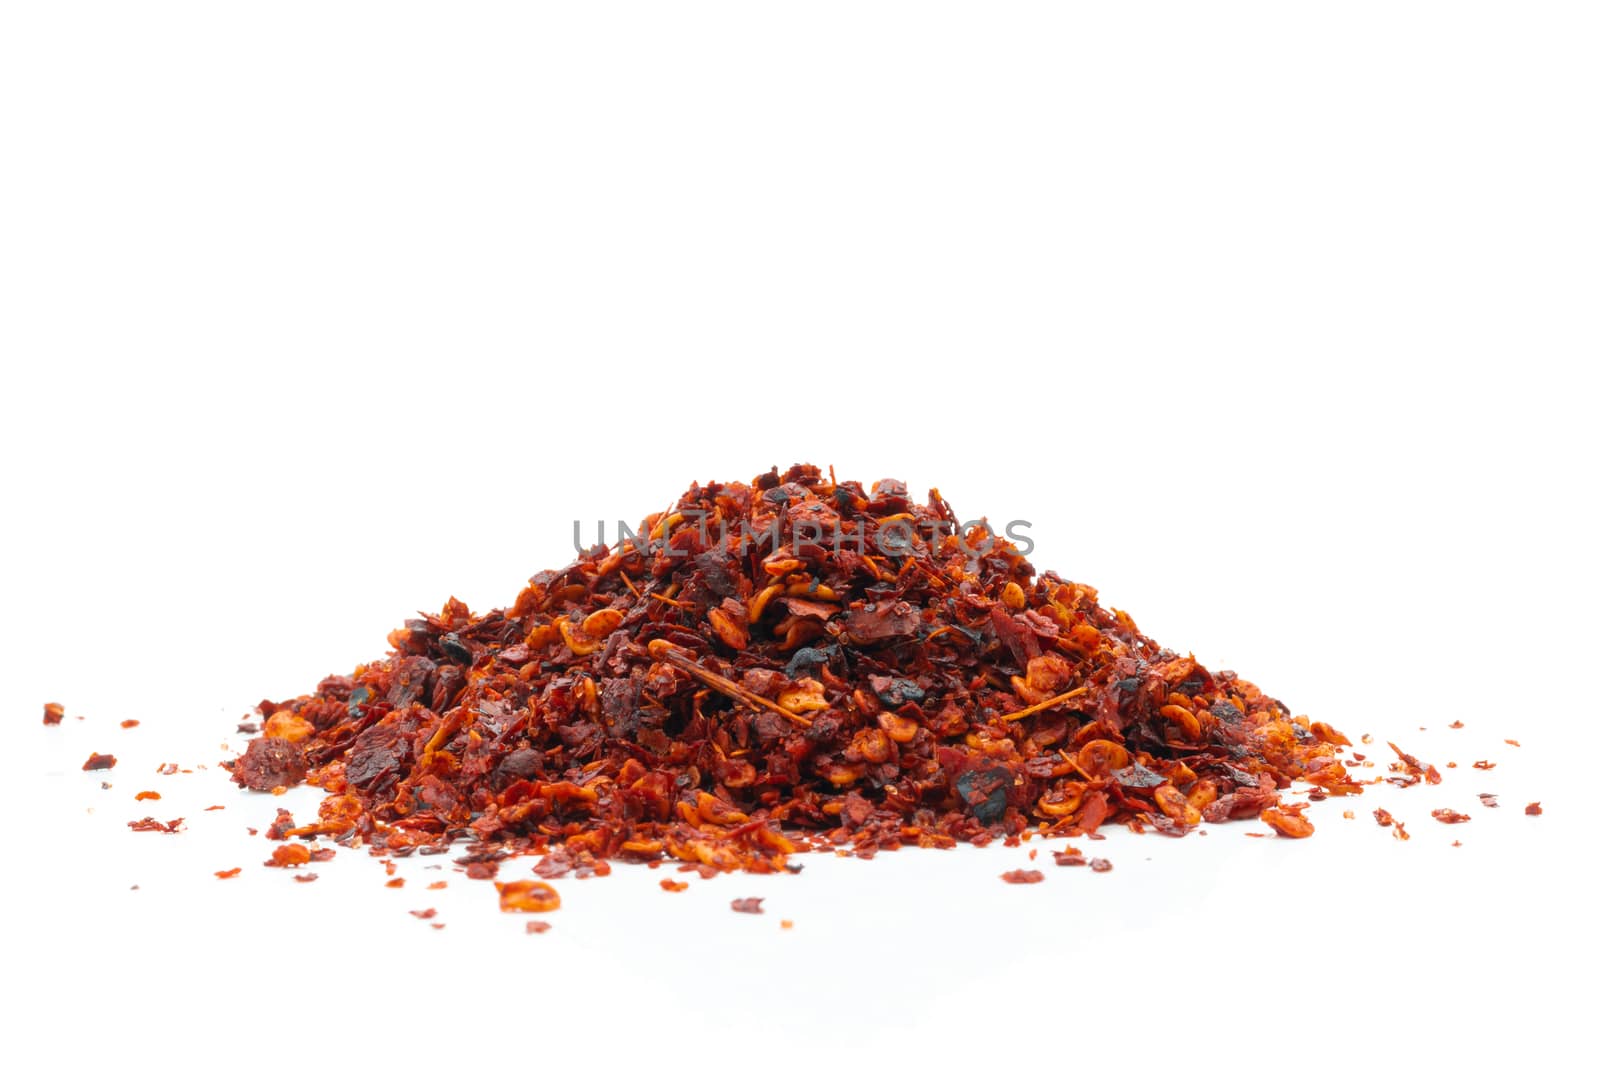 Dried chili meal on a white background by sompongtom